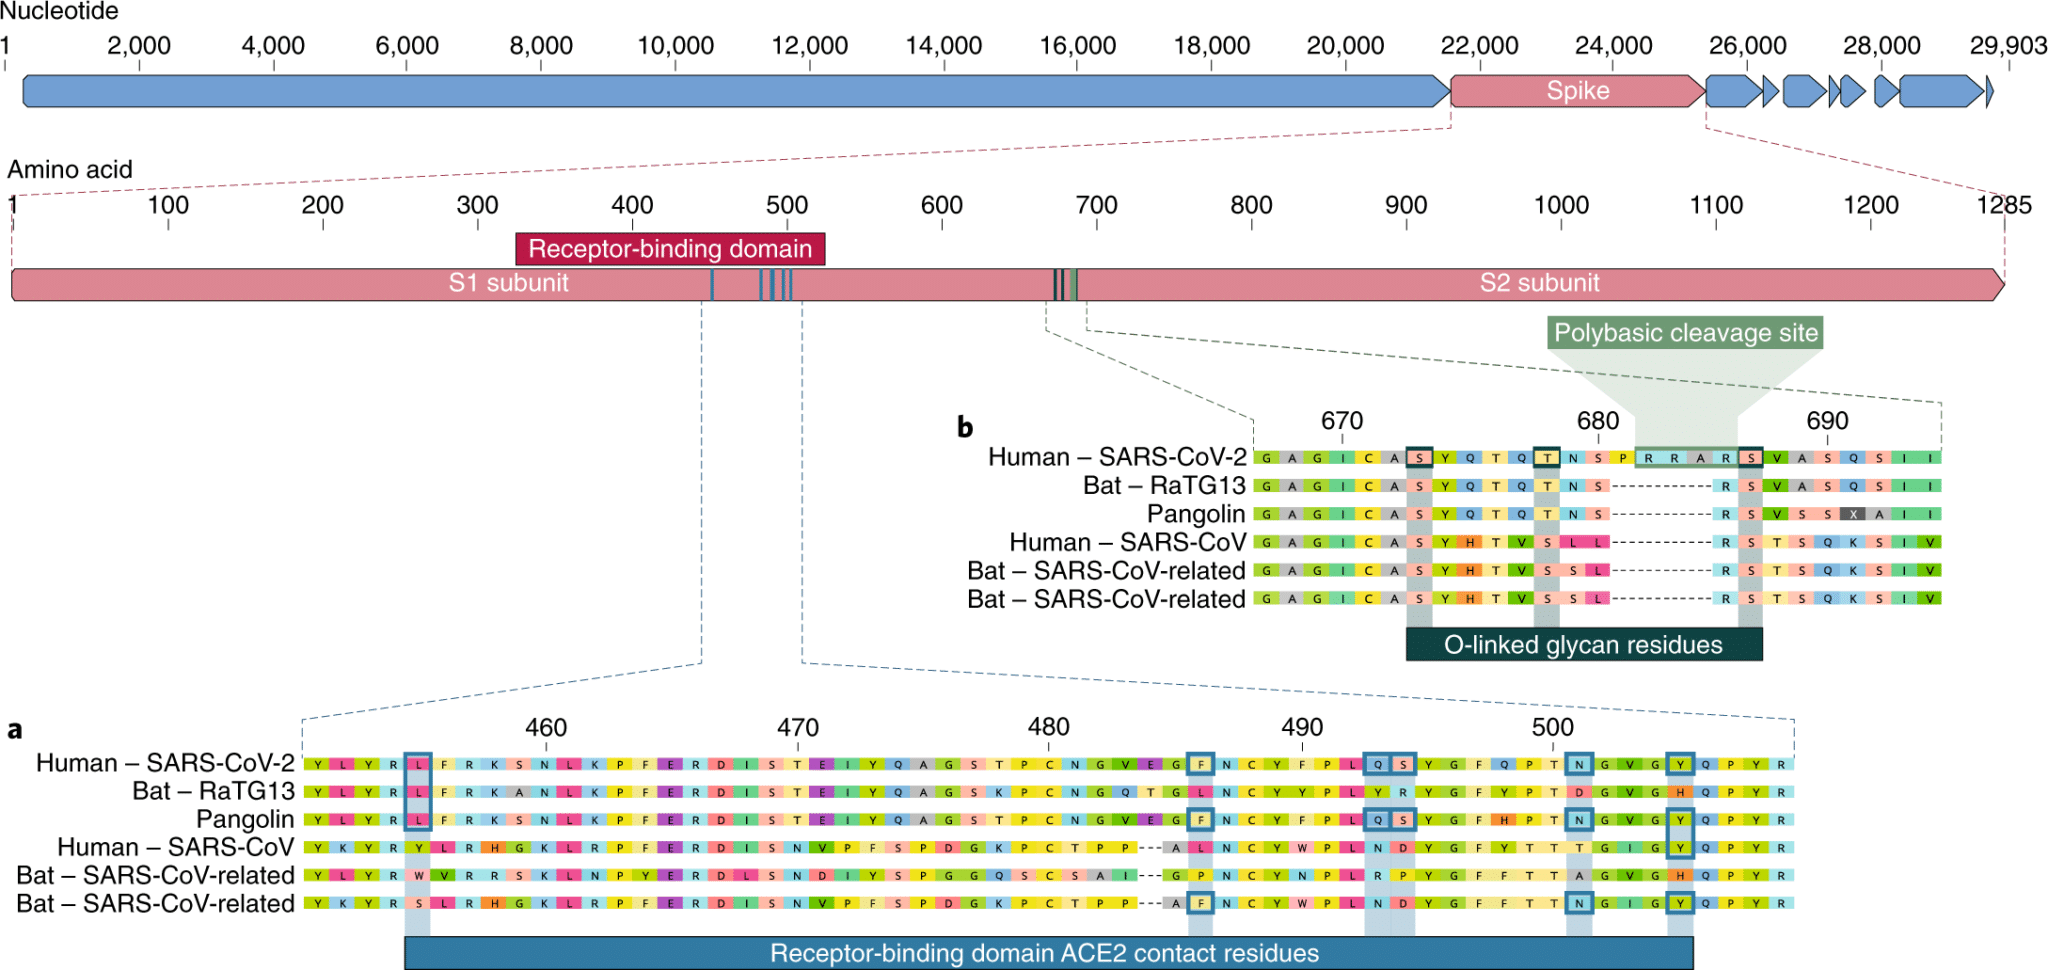 | a Mutations in contact residues of the SARS CoV 2 spike protein The spike protein of SARS CoV 2 red bar at top was aligned against the most closely related SARS CoV like coronaviruses and SARS CoV itself Key residues in the spike protein that make contact to the ACE2 receptor are marked with blue boxes in both SARS CoV 2 and related viruses including SARS CoV Urbani strain b Acquisition of polybasic cleavage site and O linked glycans Both the polybasic cleavage site and the three adjacent predicted O linked glycans are unique to SARS CoV 2 and were not previously seen in lineage B betacoronaviruses Sequences shown are from NCBI GenBank accession codes MN908947 MN996532 AY278741 KY417146 and MK211376 The pangolin coronavirus sequences are a consensus generated from SRR10168377 and SRR10168378 NCBI BioProject PRJNA5732982930 | MR Online